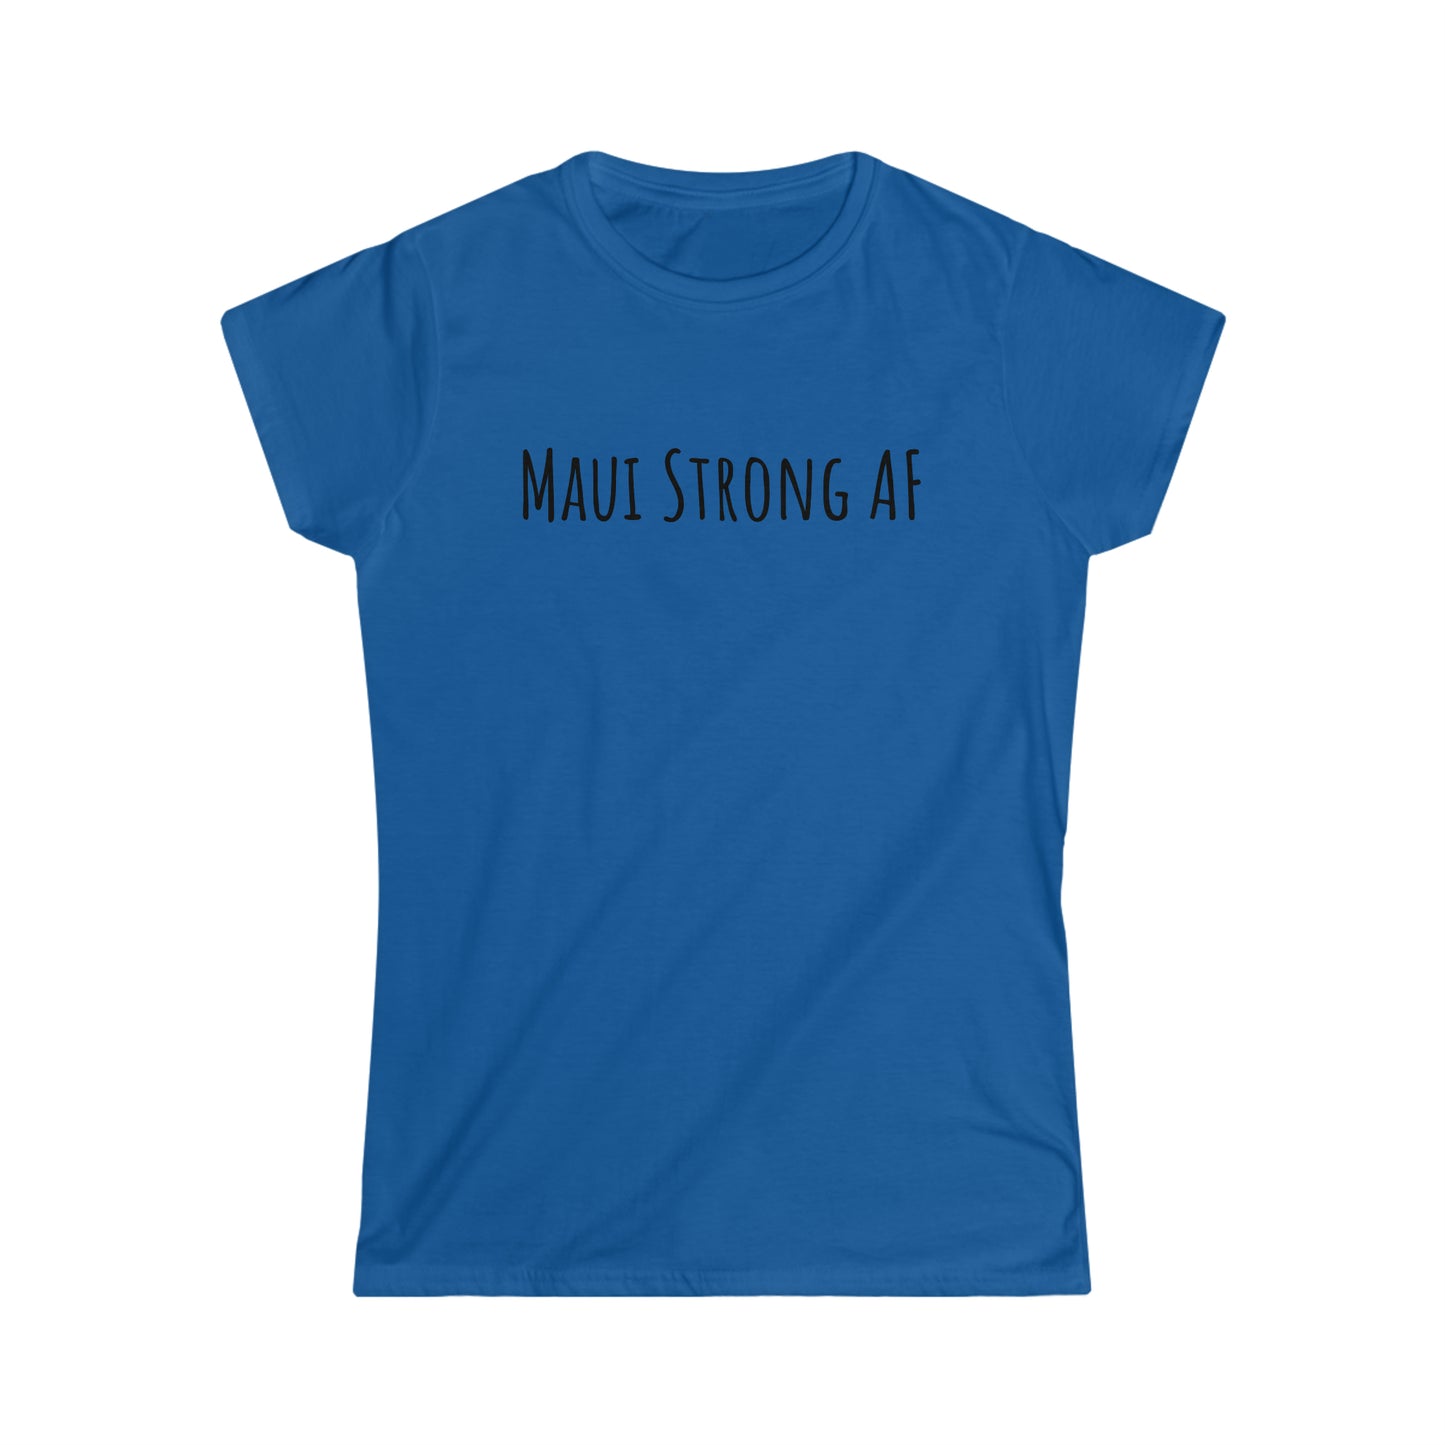 Maui Strong AF Women's Cap Sleeve Softstyle Tee in 4 colors